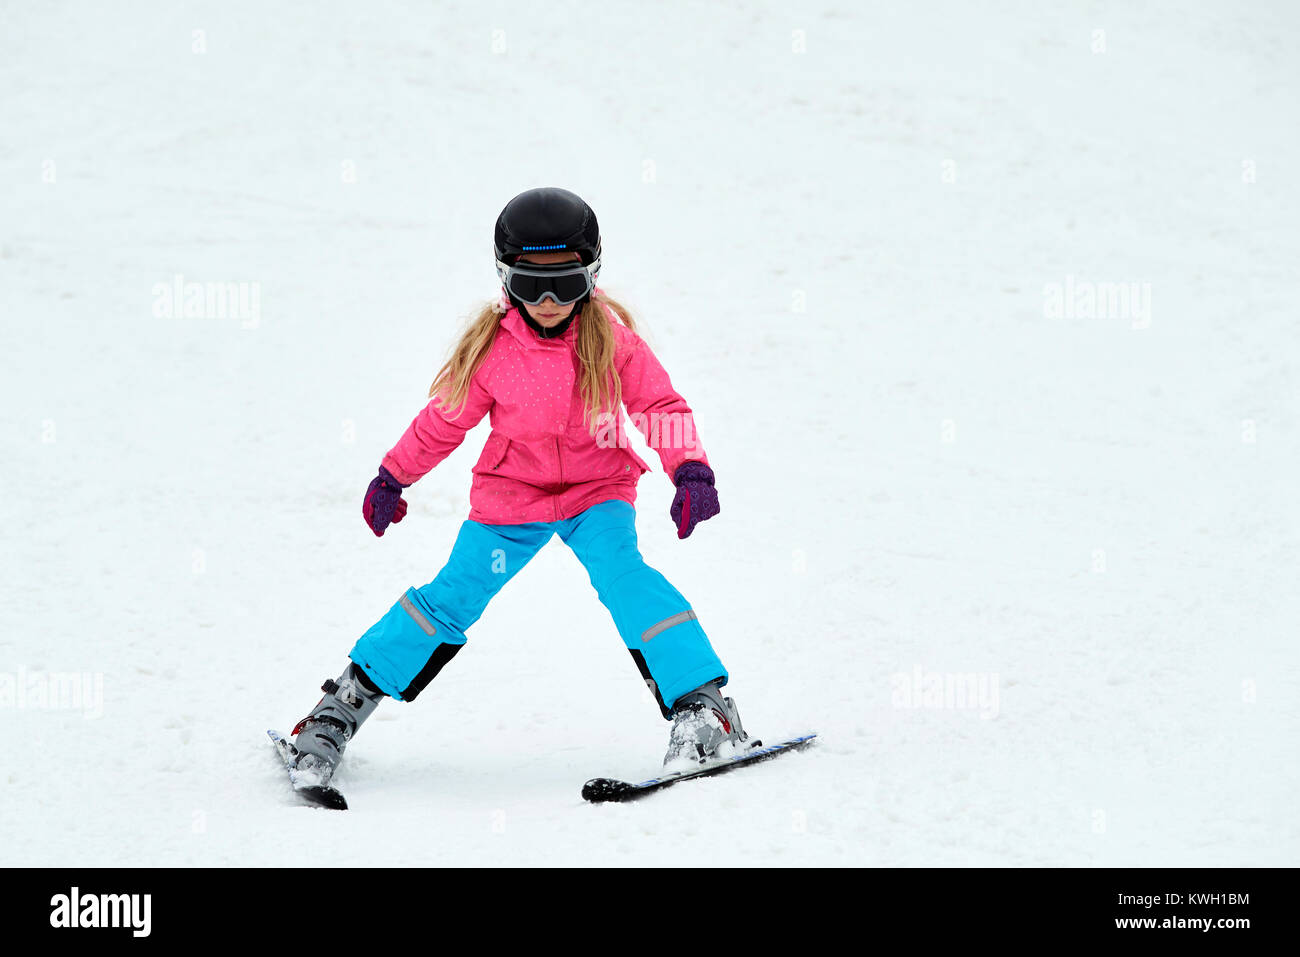 Child skiing in the mountains. Girl in colorful suit and safety helmet learning to ski. Winter sport for family with young children. Kids ski lesson i Stock Photo